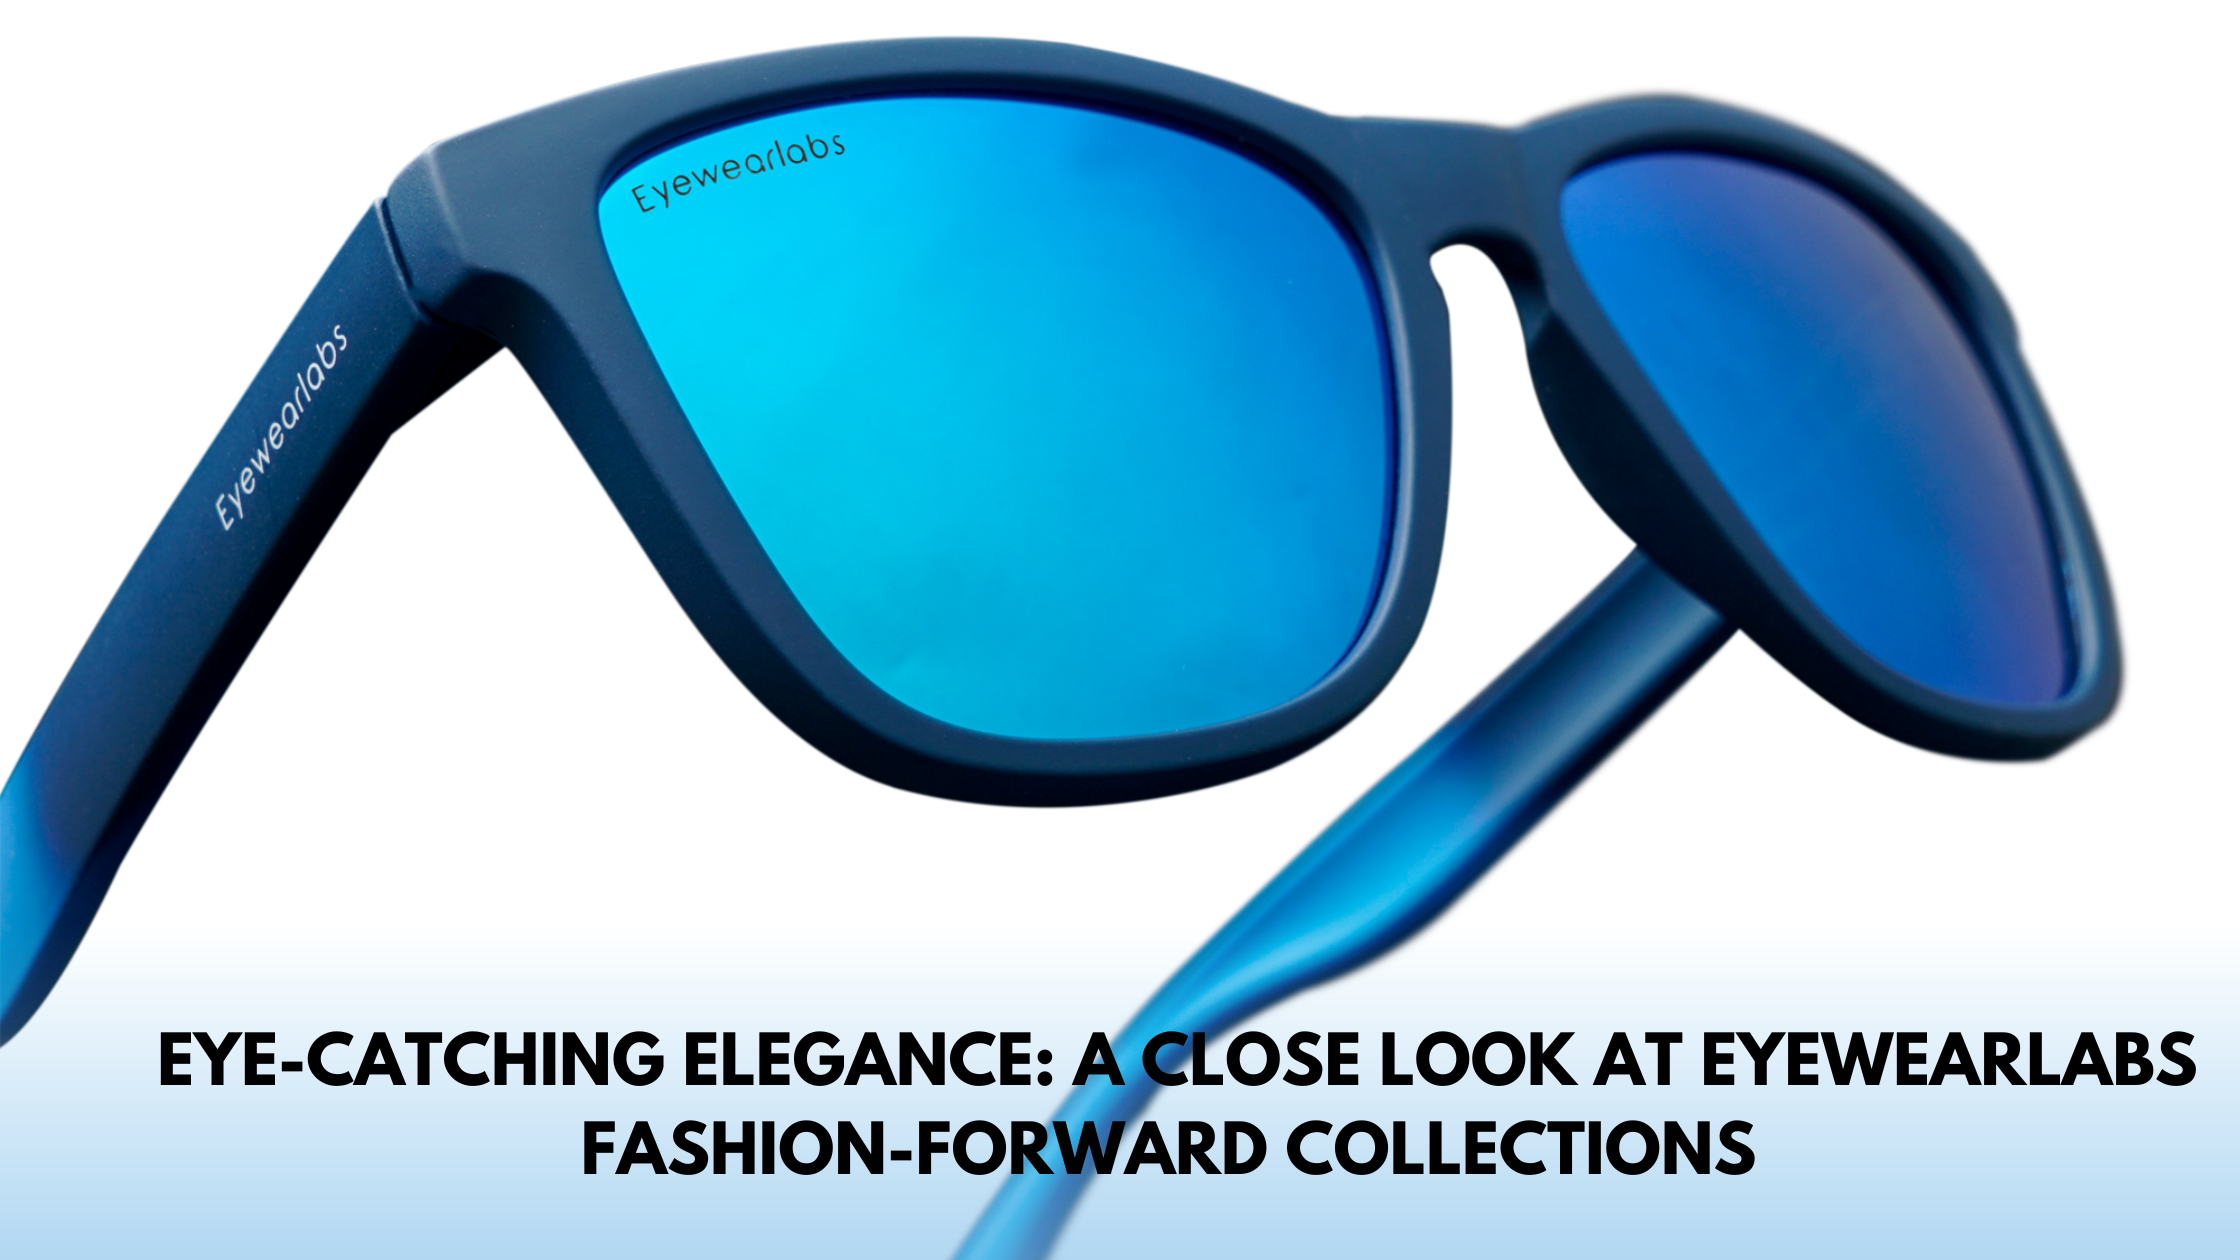 Eye-Catching Elegance: A Close Look at Eyewearlabs Fashion-Forward Collections